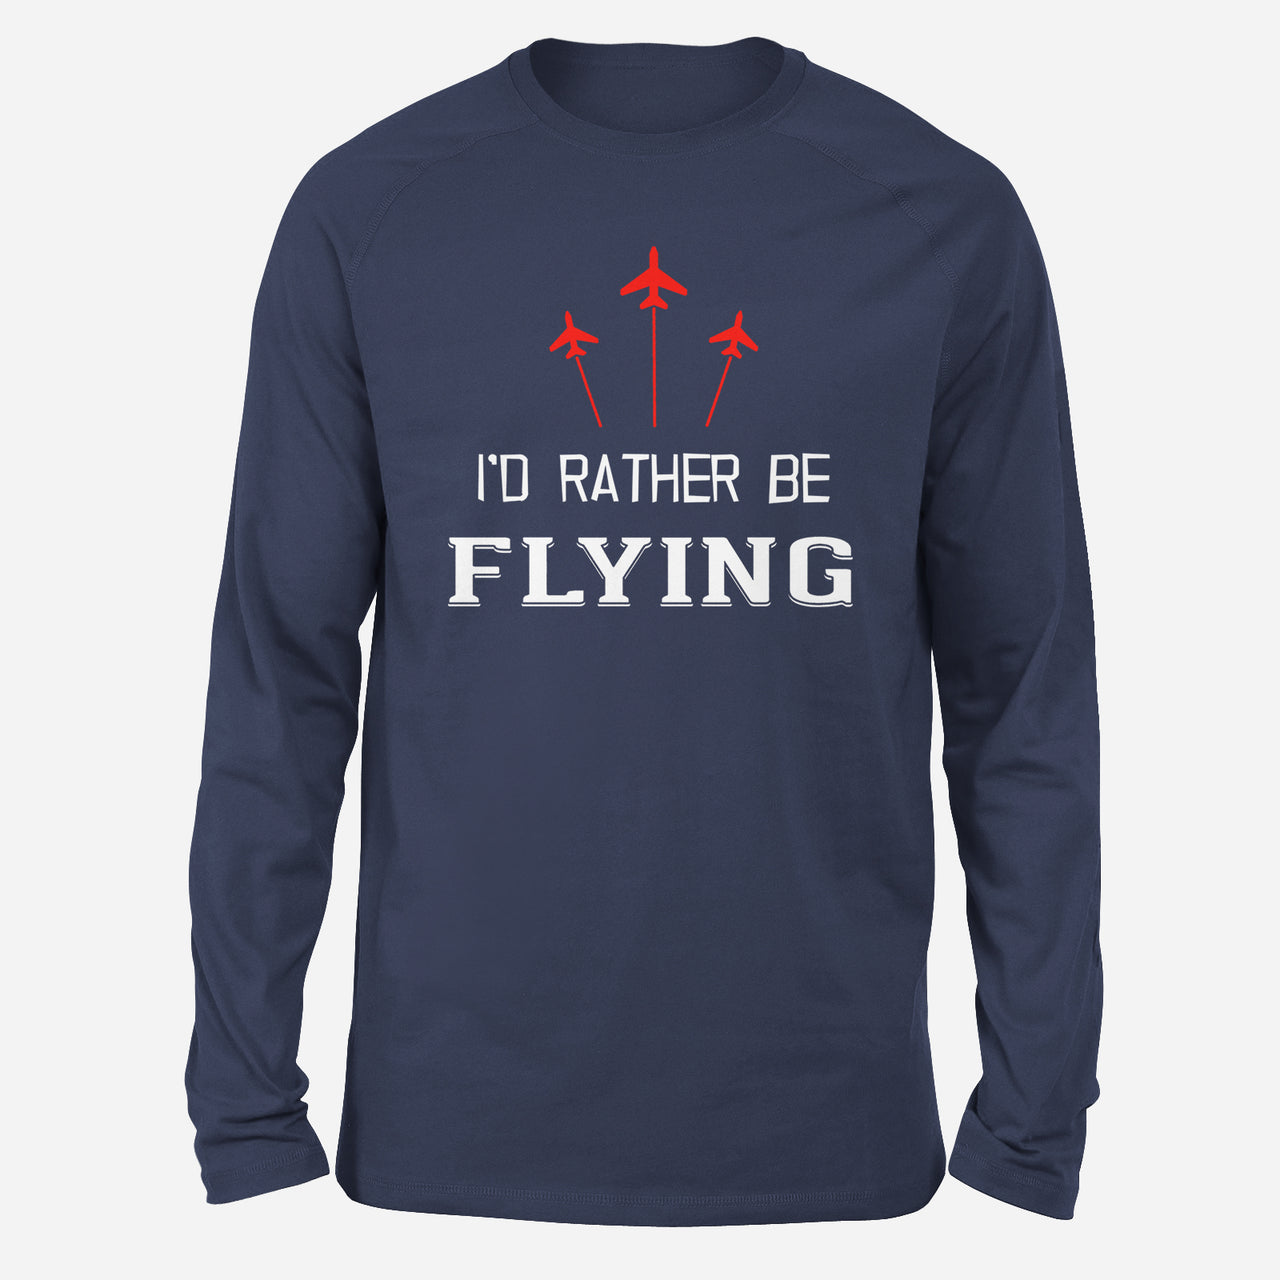 I'D Rather Be Flying Designed Long-Sleeve T-Shirts